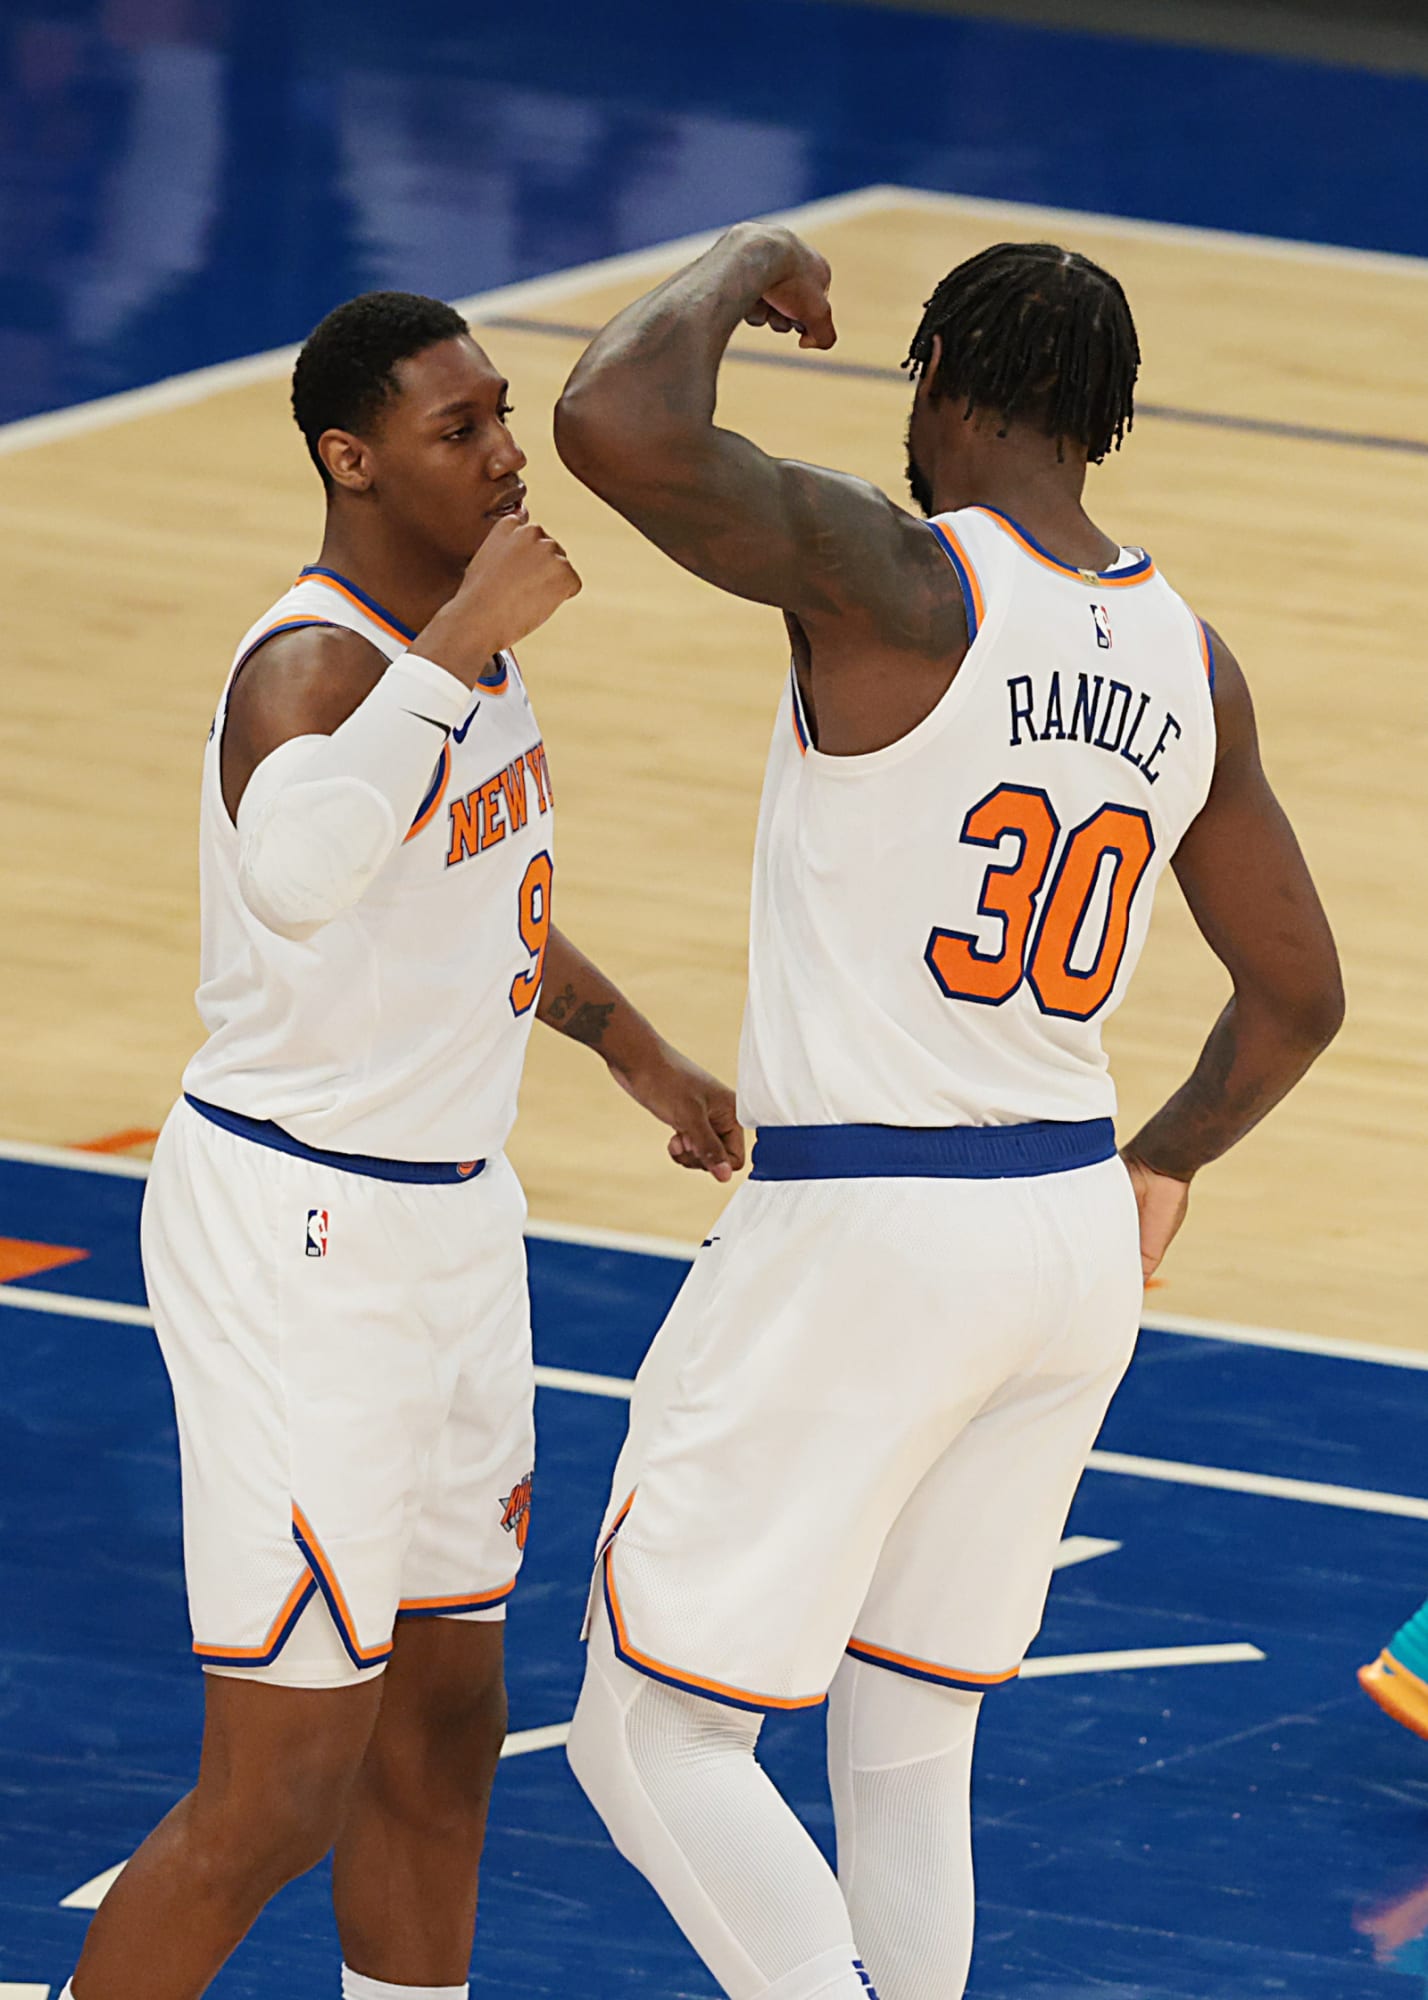 Knicks' starting lineup is full of promise even without trading for a star